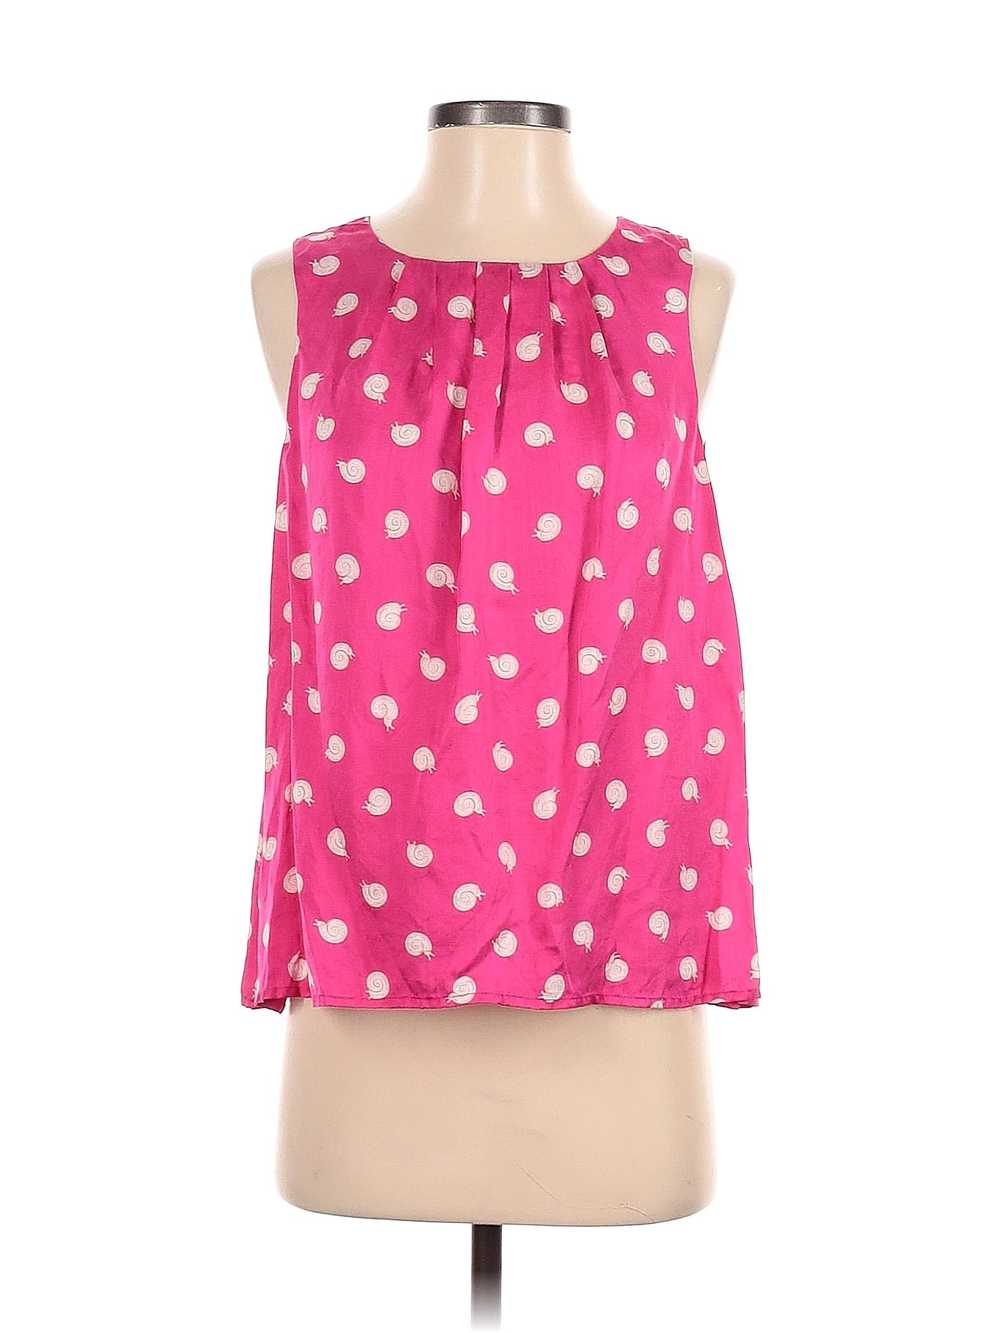 Urban Outfitters Women Pink Sleeveless Silk Top 2 - image 1